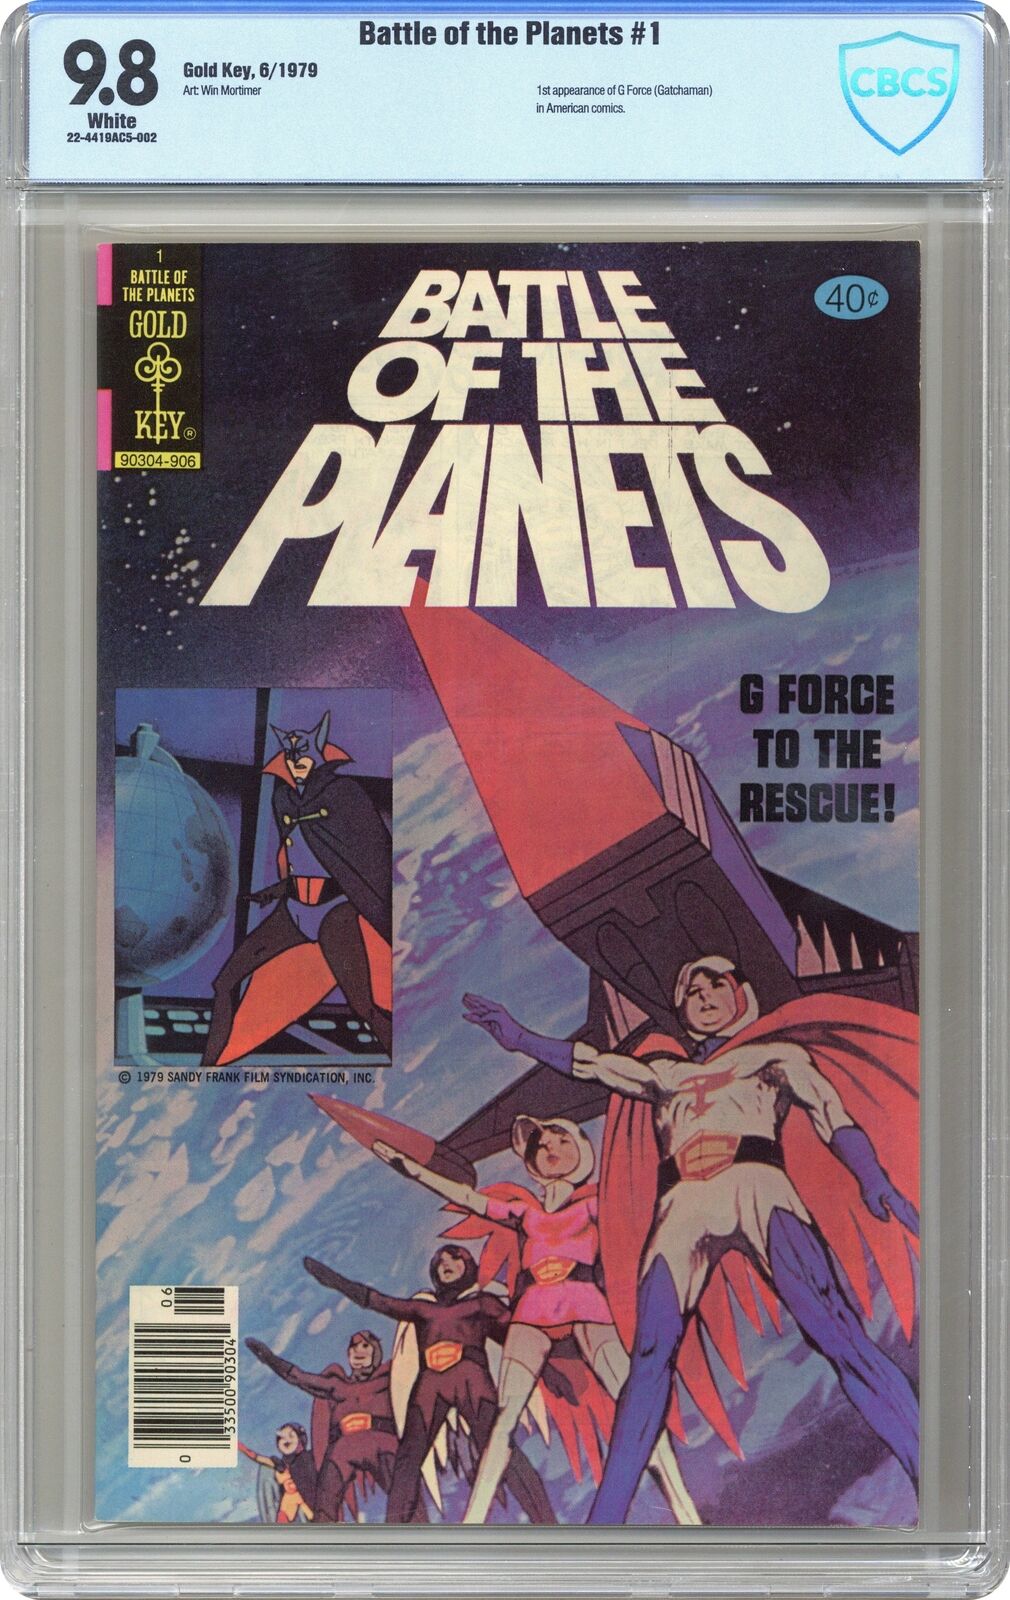 Battle of the Planets #1 CBCS 9.8 1979 Gold Key 22-4419AC5-002